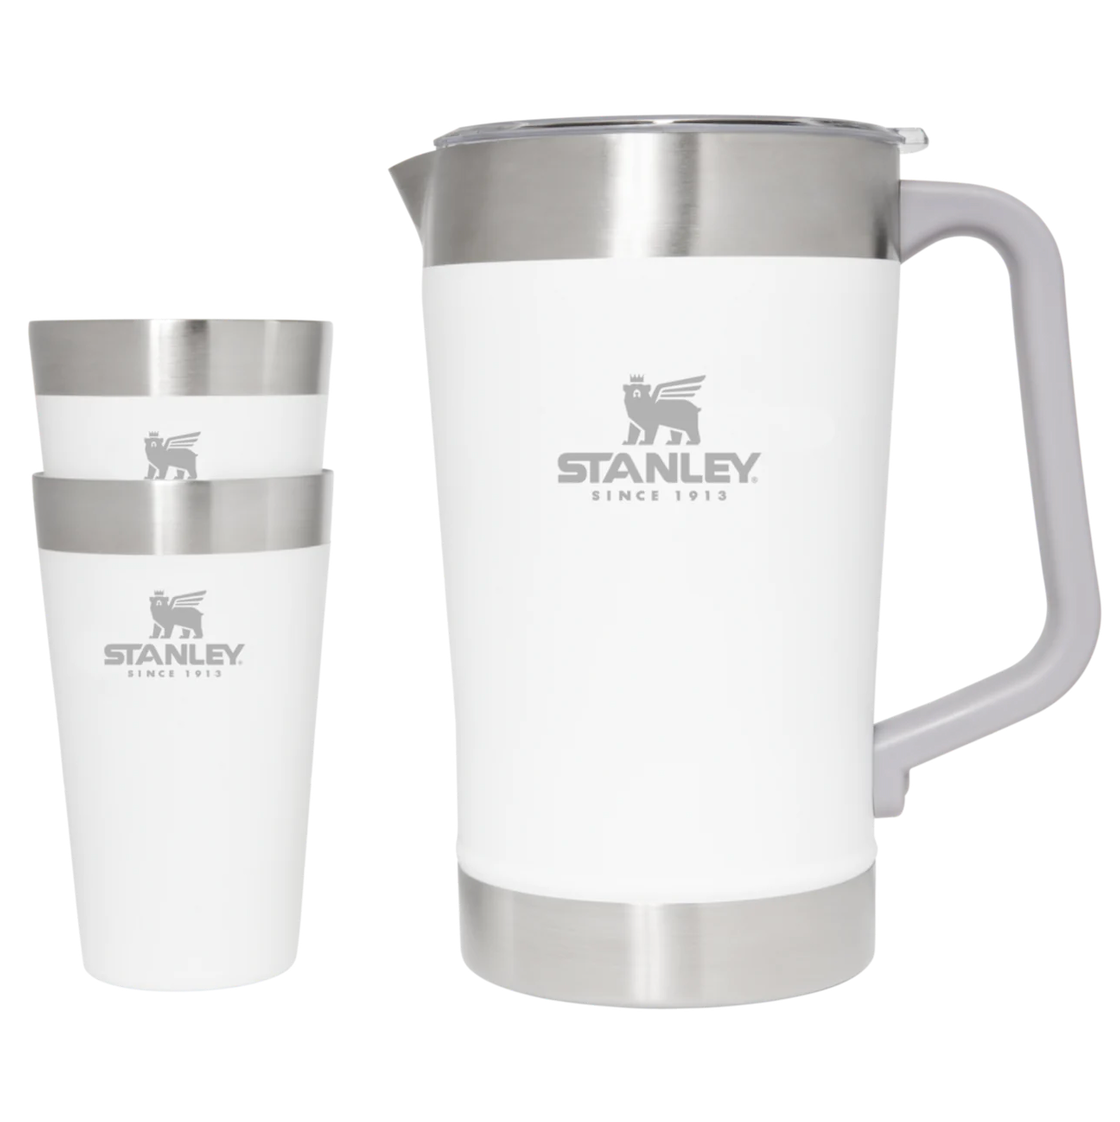 Stanley camping gear is on sale for up to 30% off on